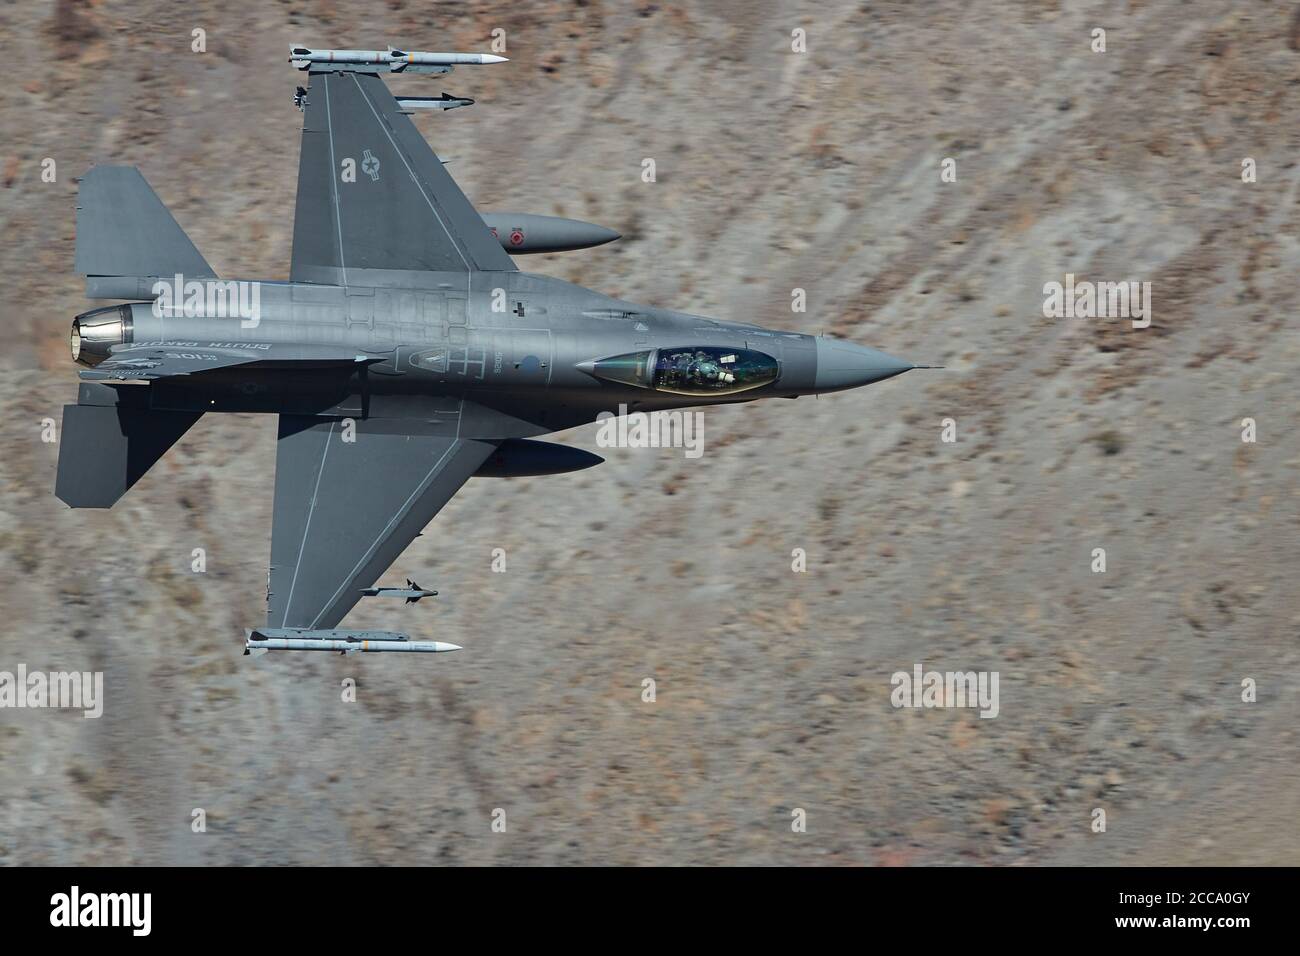 South Dakota Air National Guard, F-16, Fighting Falcon Jet Fighter Flying At Low Level And High Speed Through Rainbow Canyon, California. Stock Photo